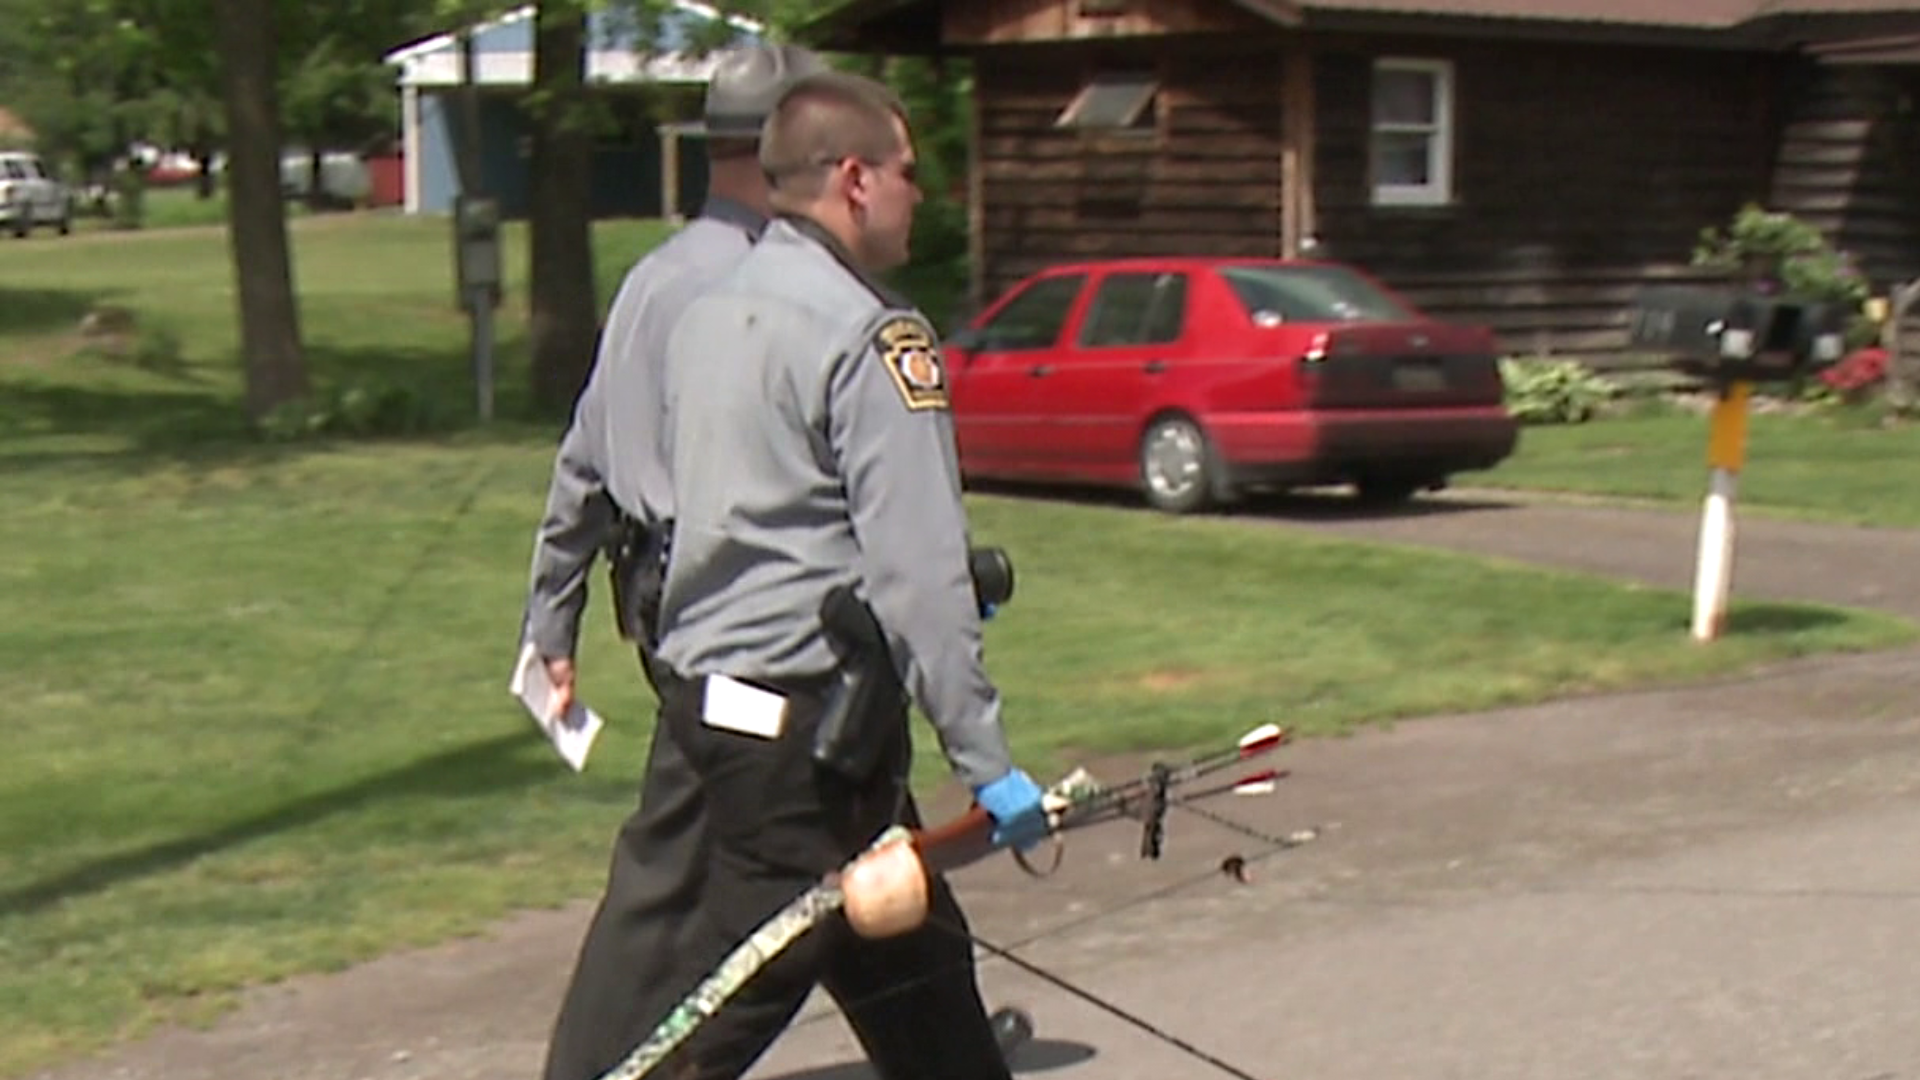 Police say two were taken to Wilkes-Barre area hospitals after being shot with arrows.